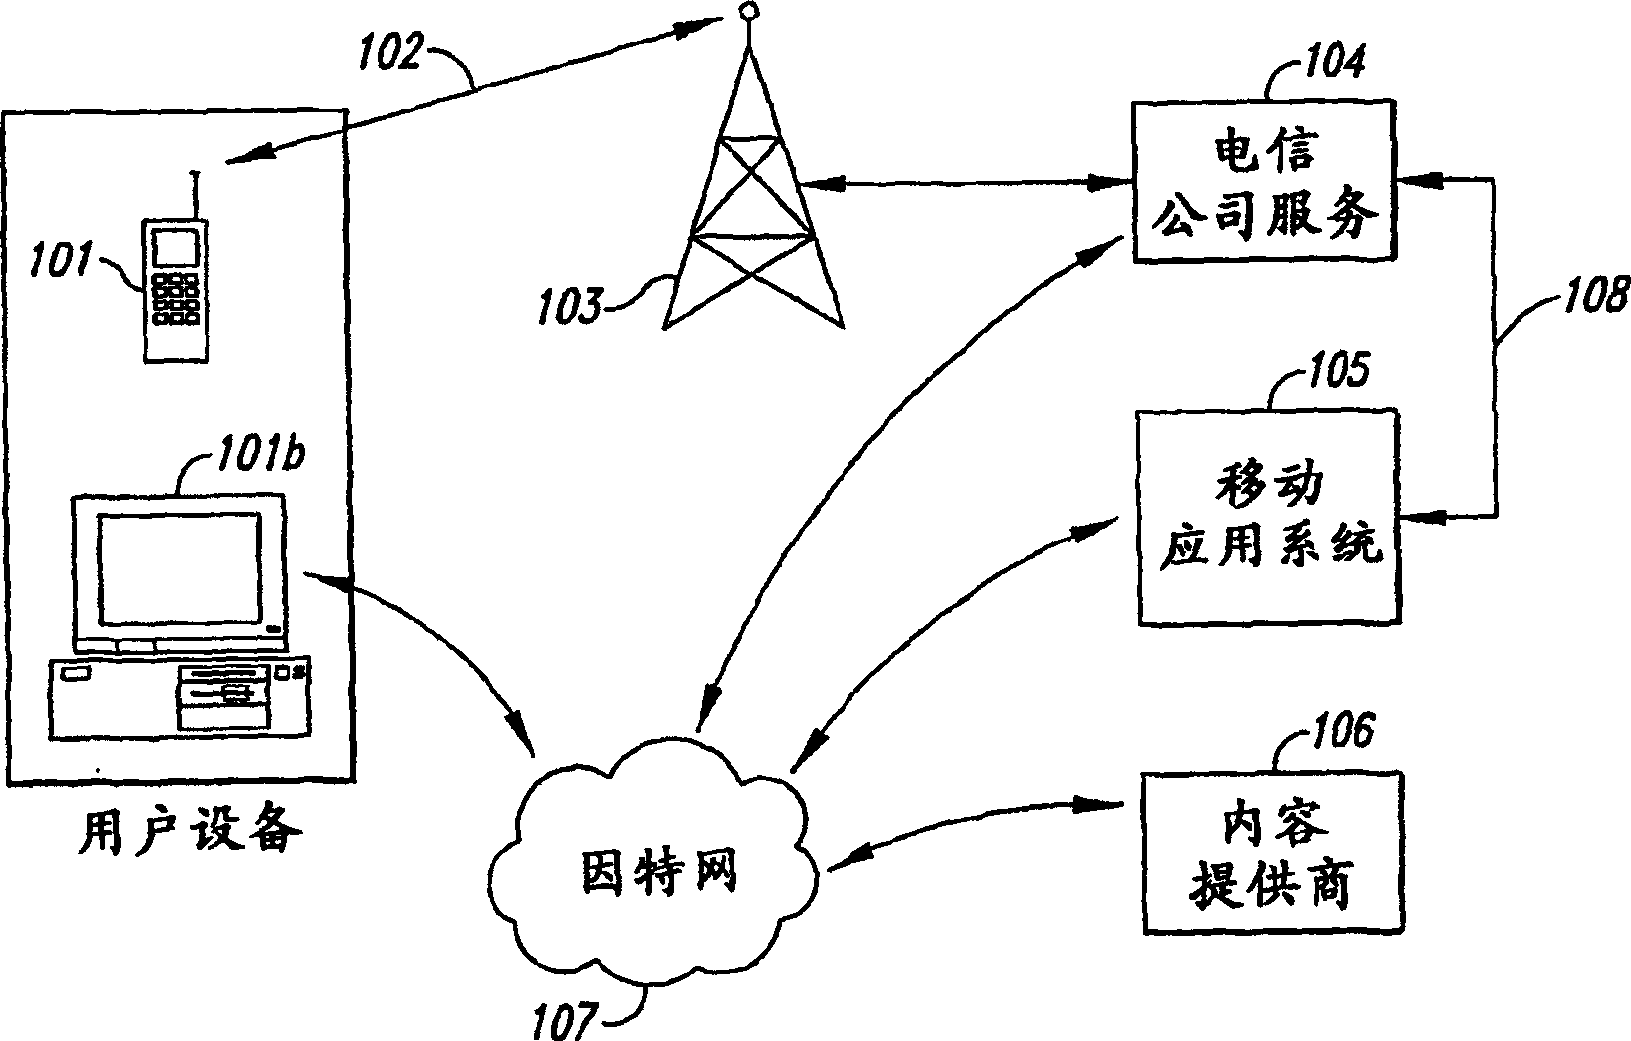 Method and system for maintaining and distributing wireless applications